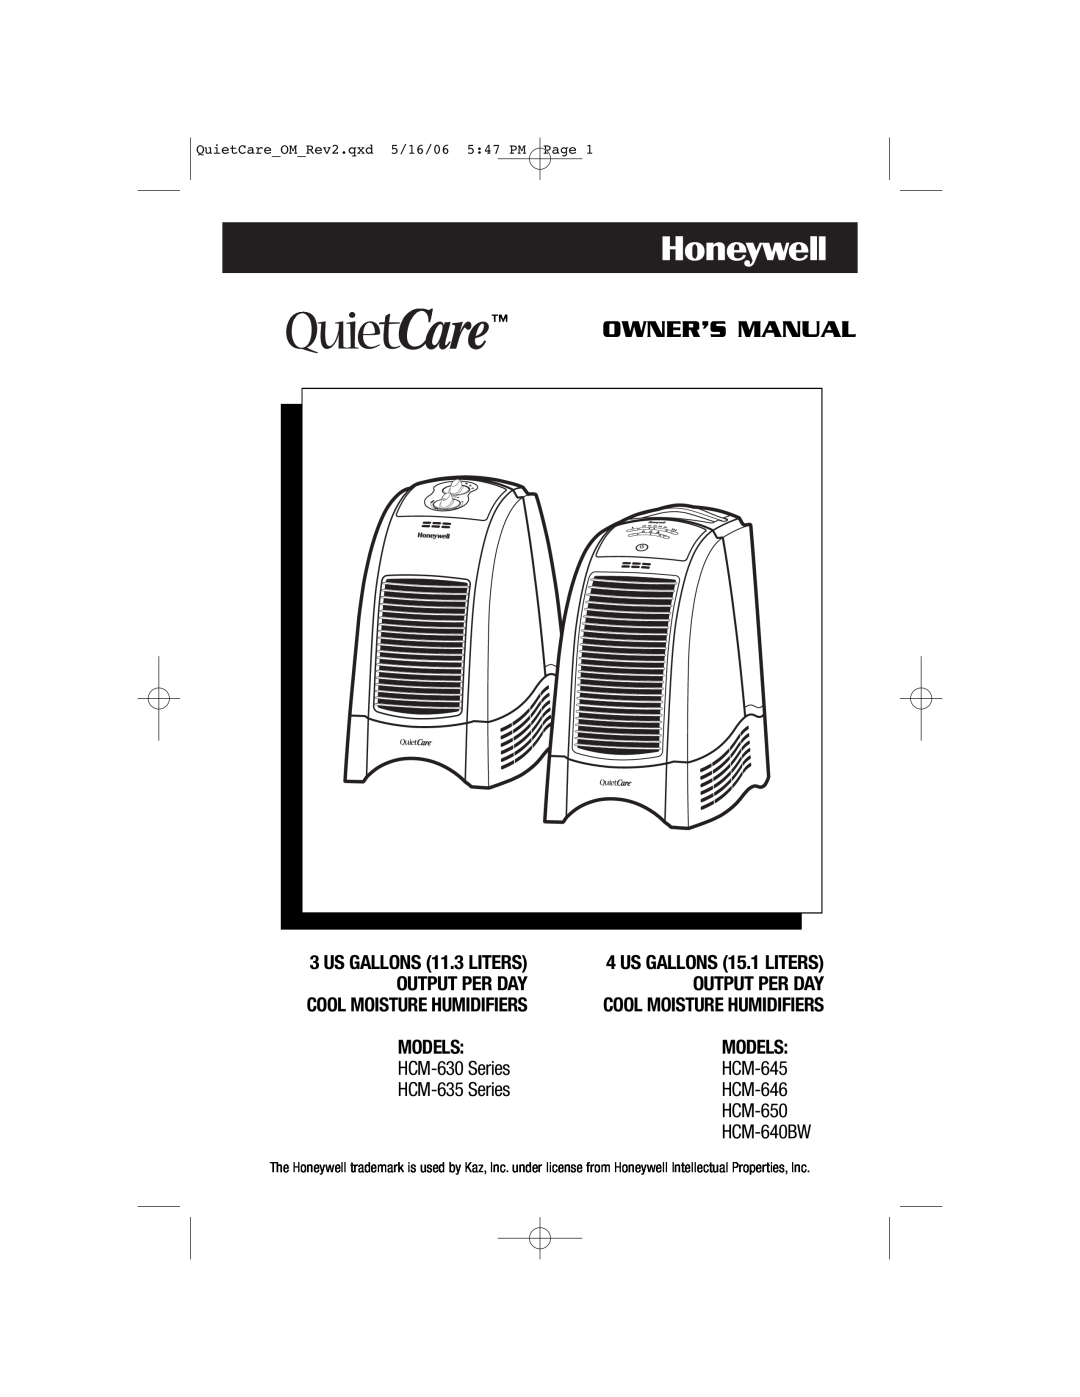 Honeywell HCM-646 owner manual Output Per Day, Models, HCM-630Series, HCM-645, HCM-635Series, HCM-650, HCM-640BW 